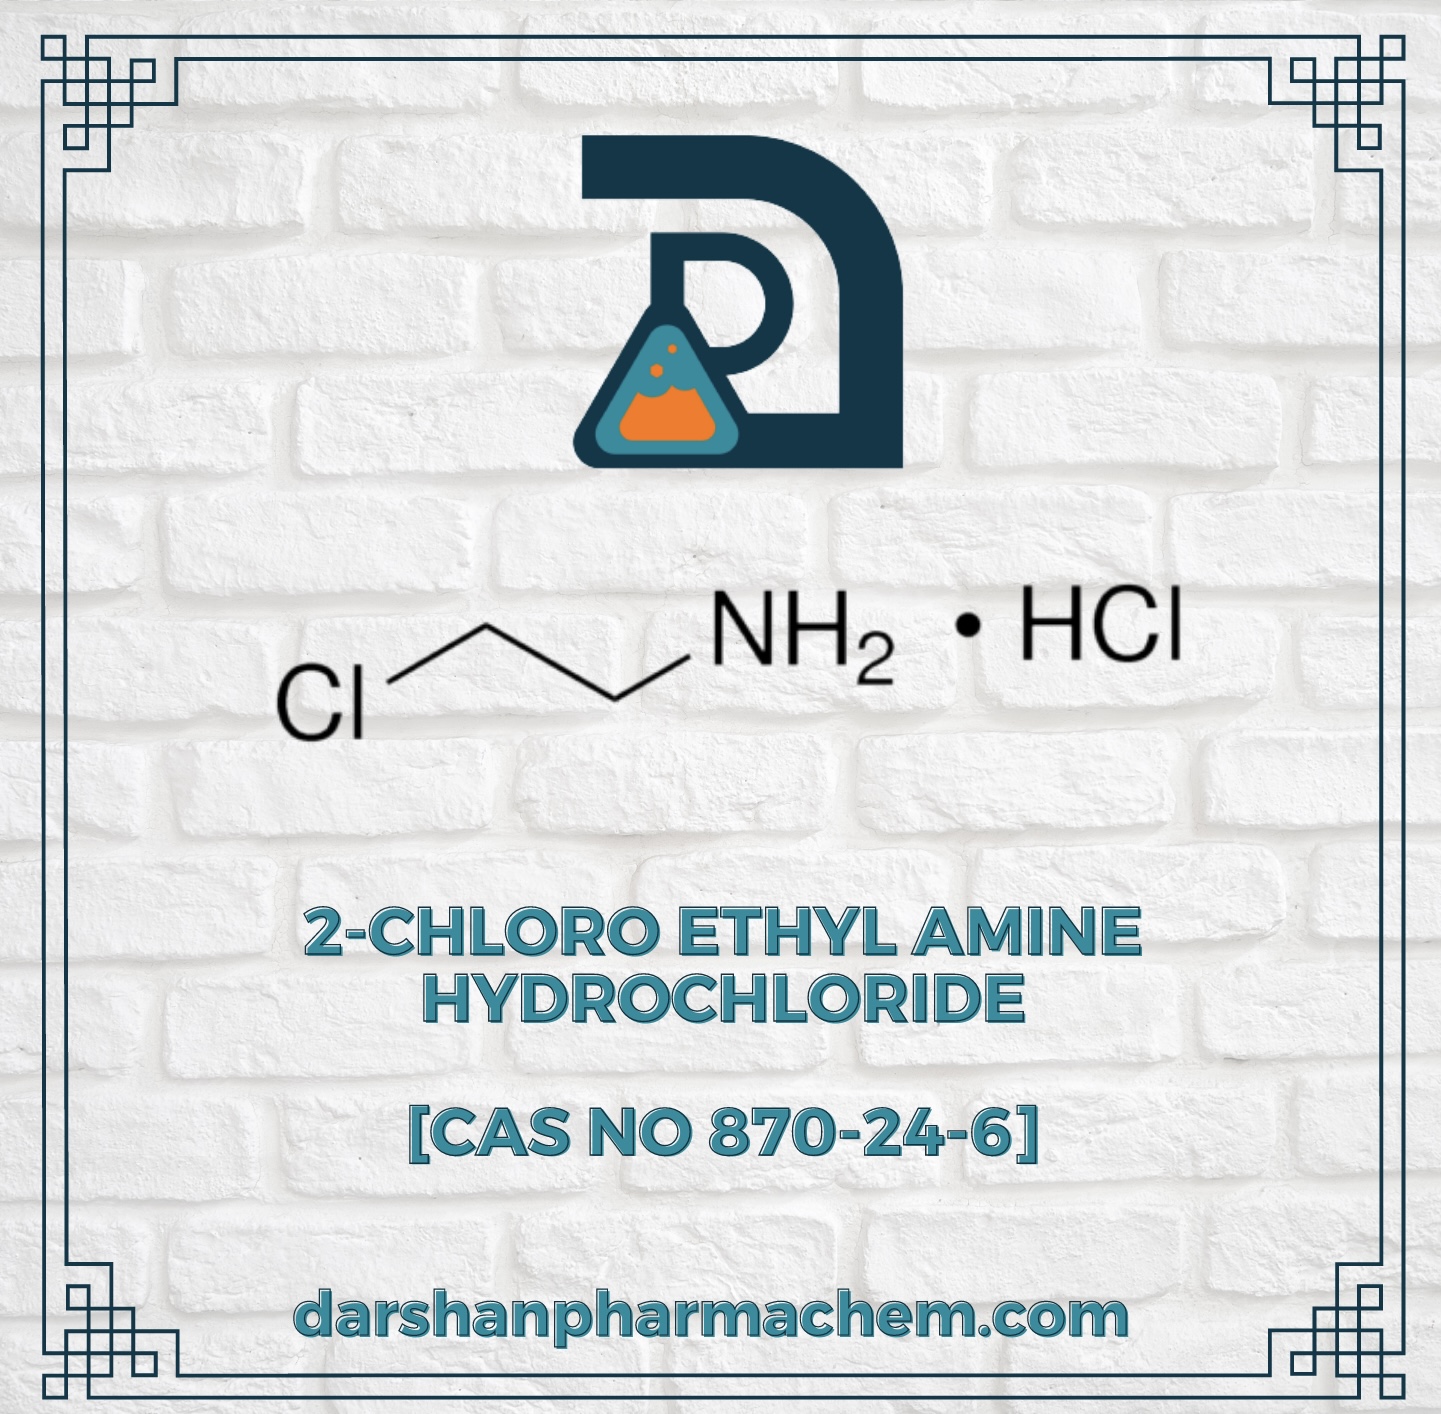 1 acetyl2-Chloroethylamine Hydrochloride Manufacturer and exporter from gujarat India.